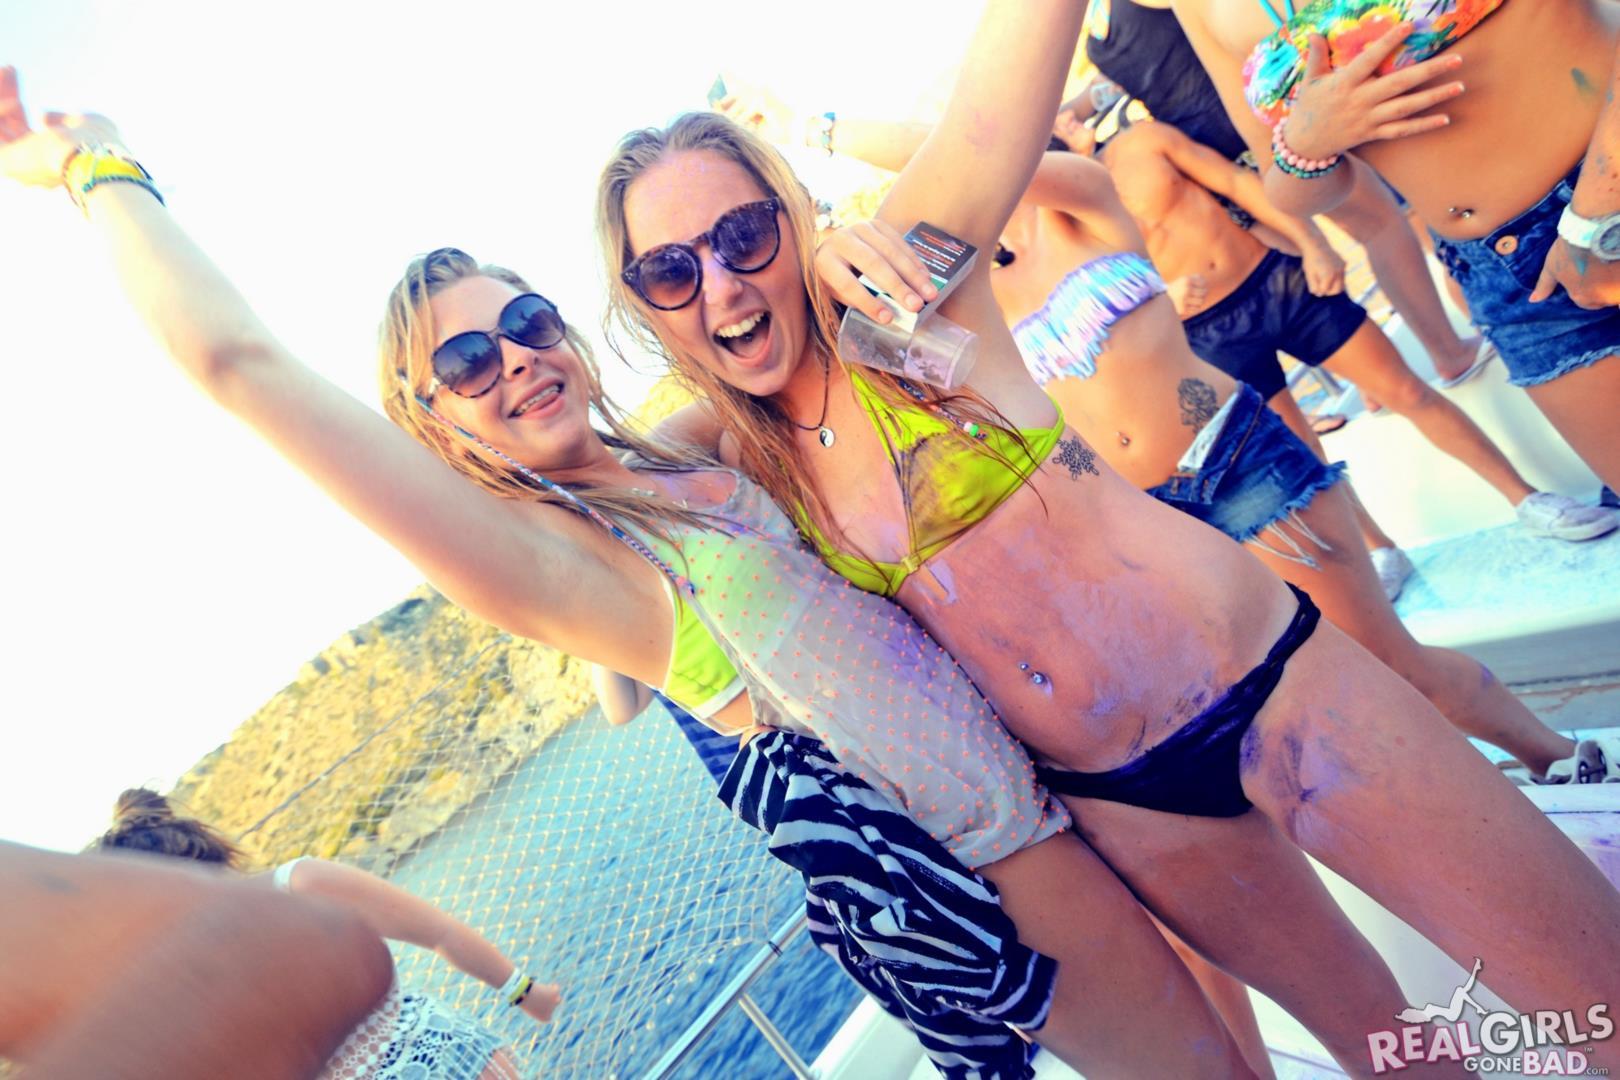 Hot college coeds go wild on a boat party #60774604